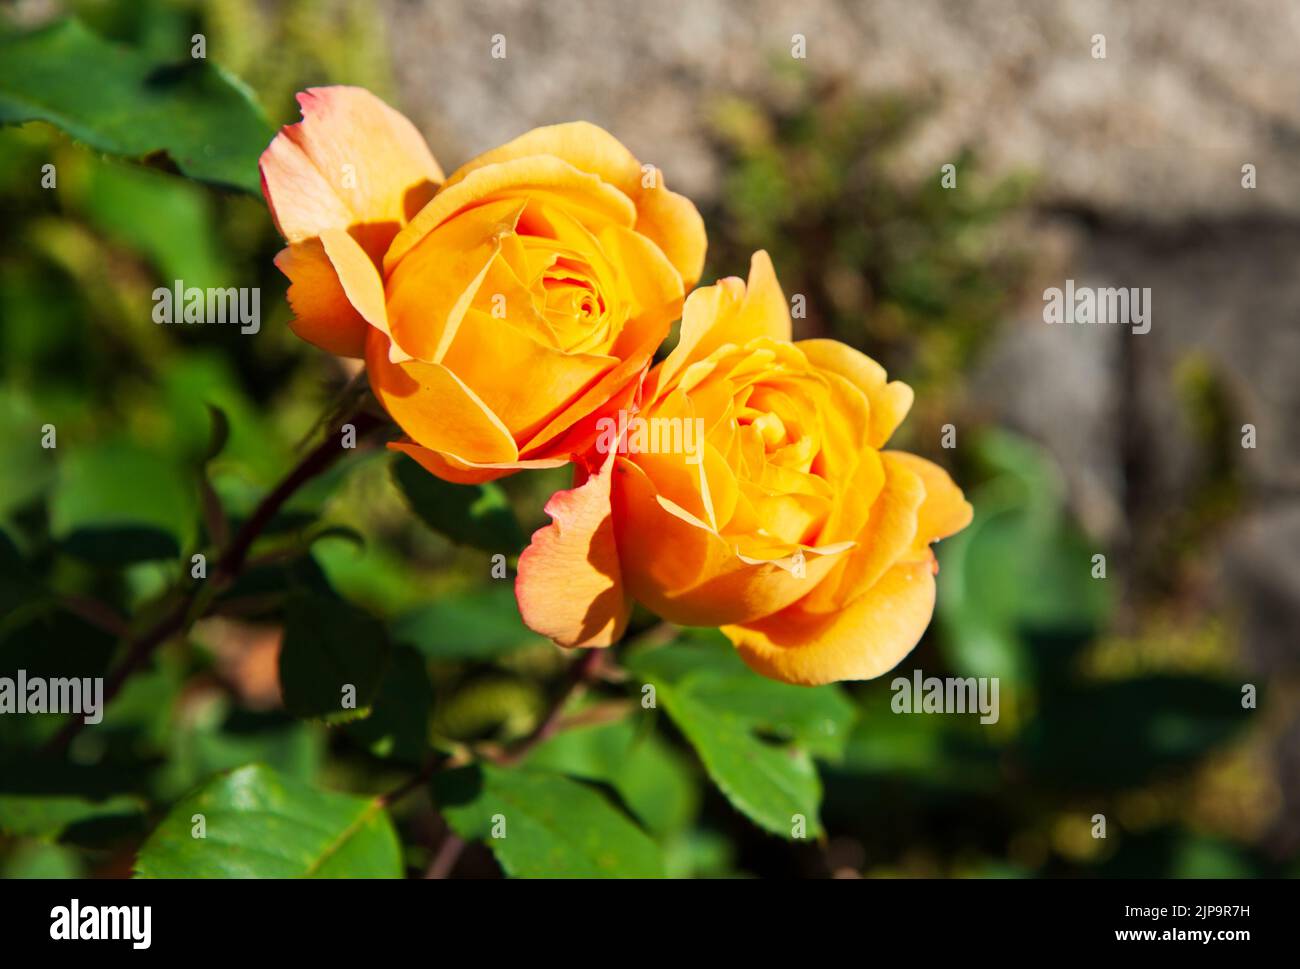 Beautiful yellow roses blossom in the garden on a sunny day Stock Photo